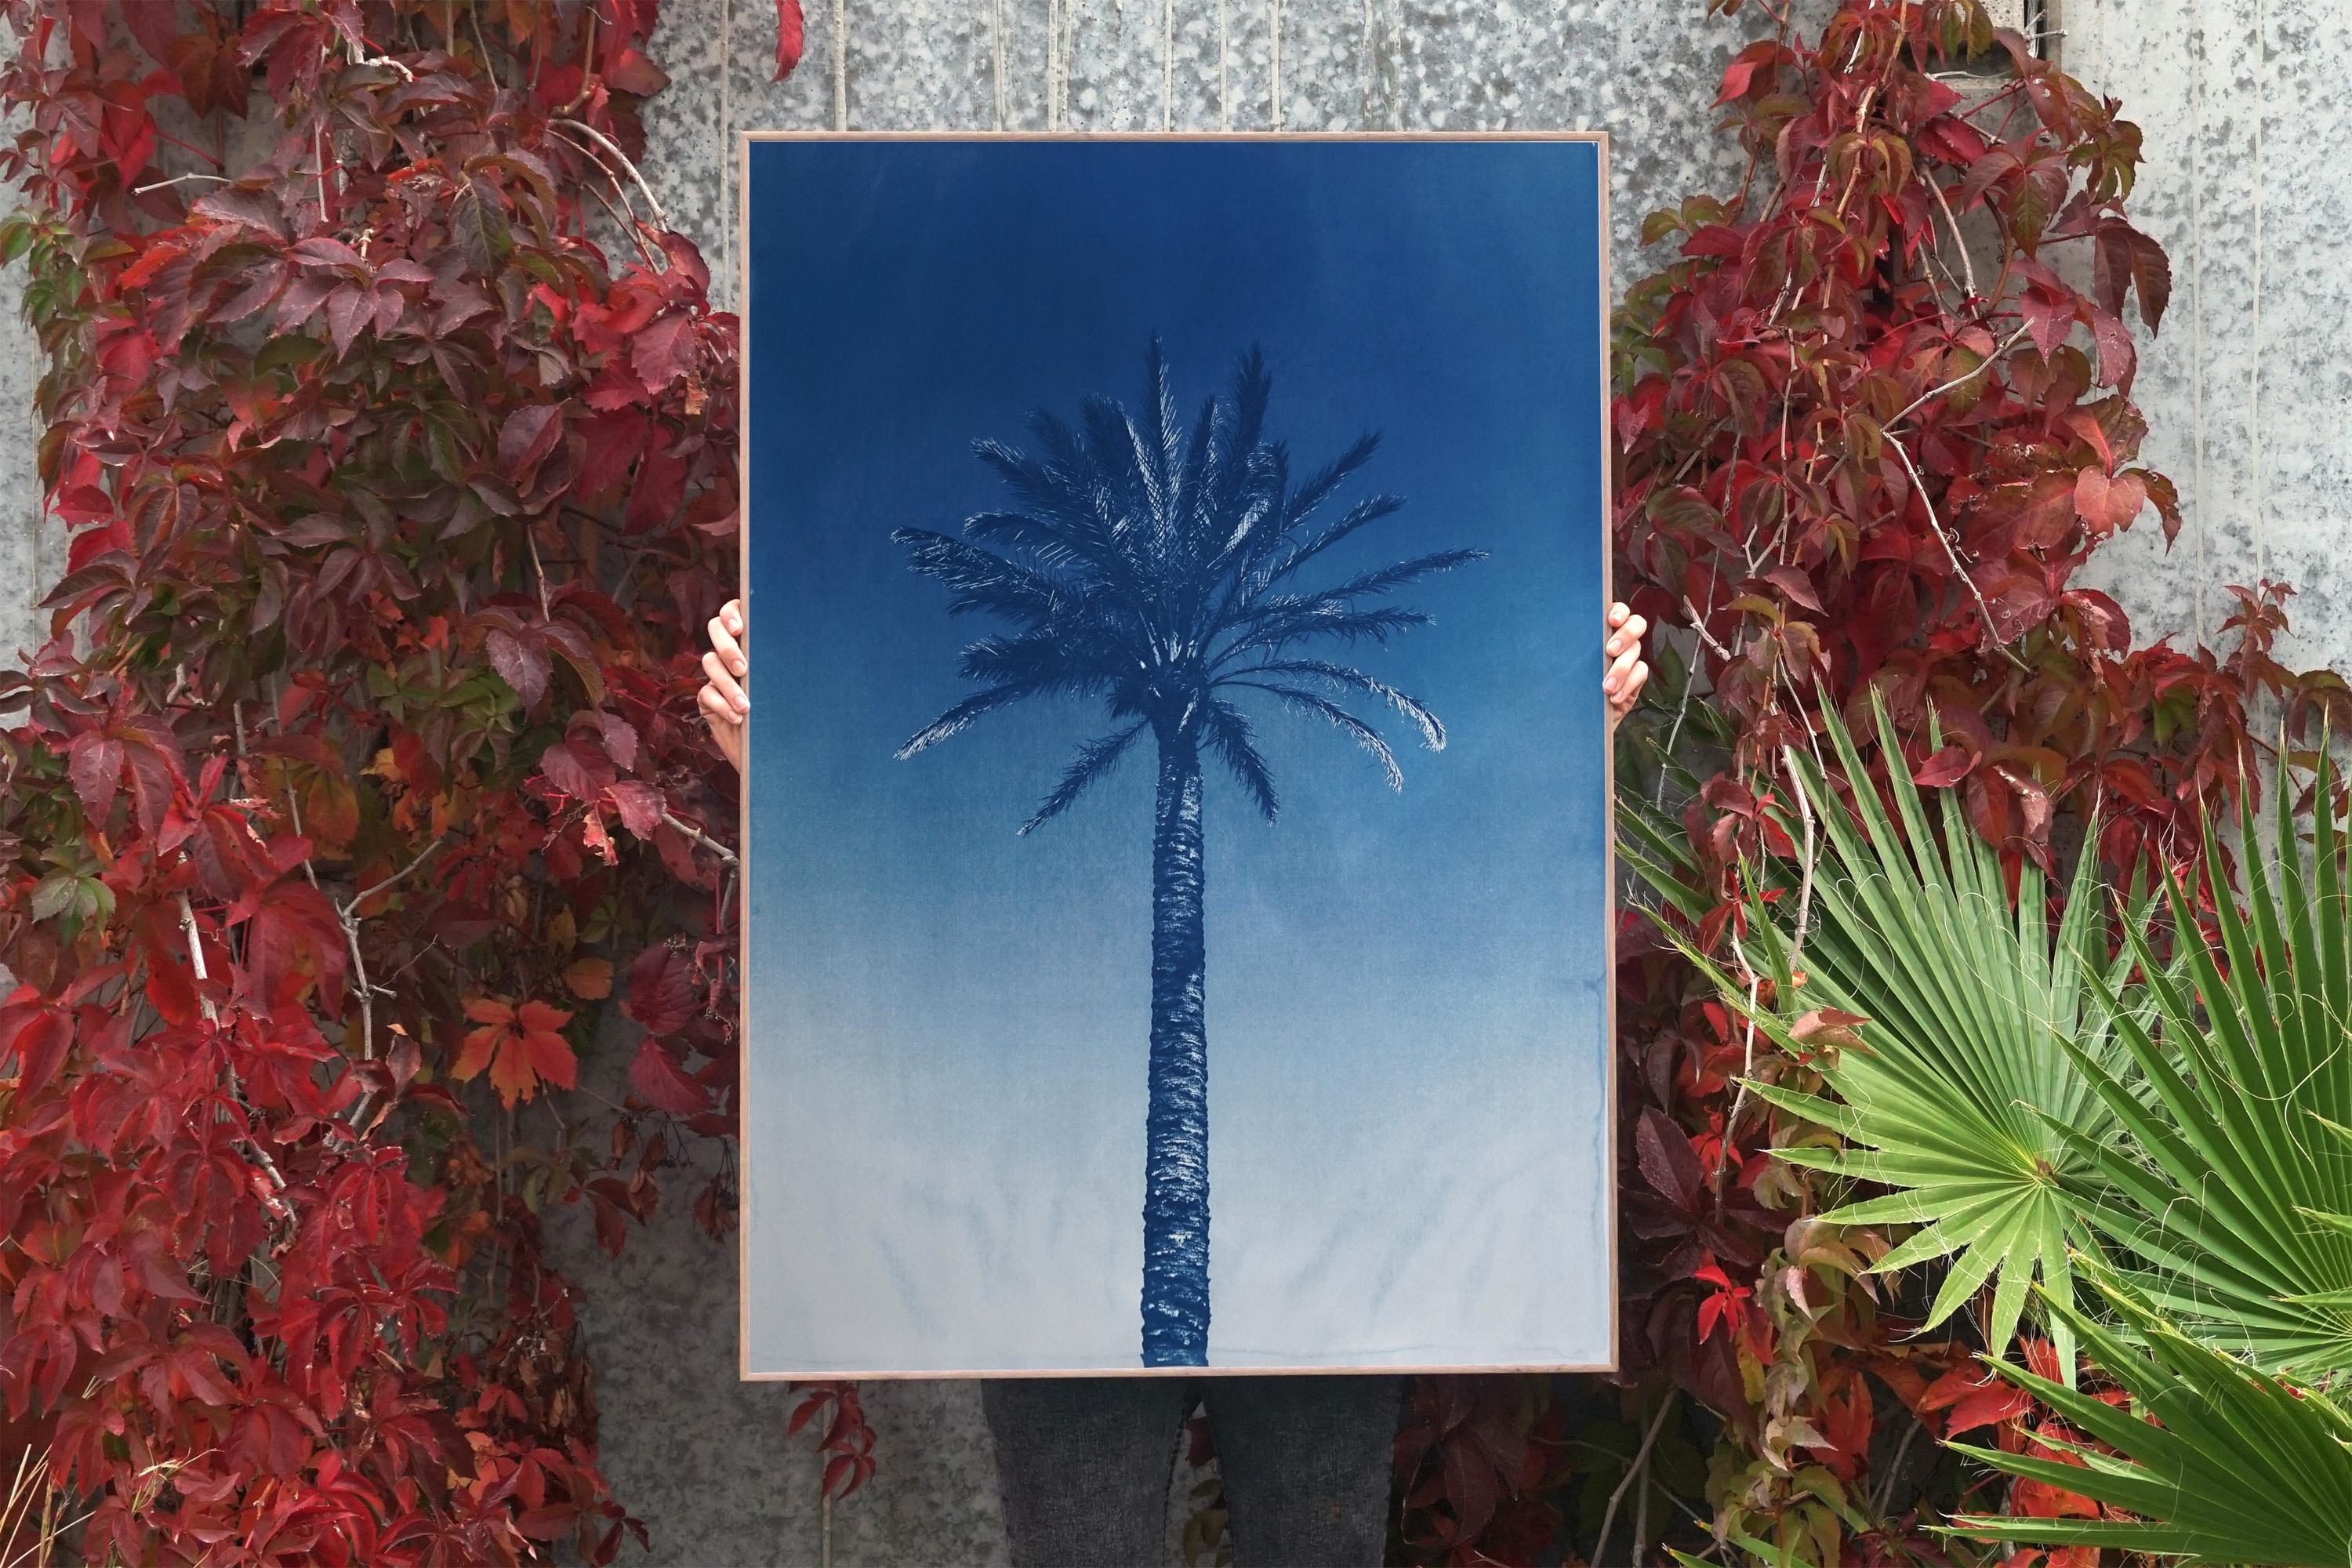 Nile River Palm, Botanical Cyanotype, Watercolor Paper, Blue Tropical Palm 2022 - Art by Kind of Cyan